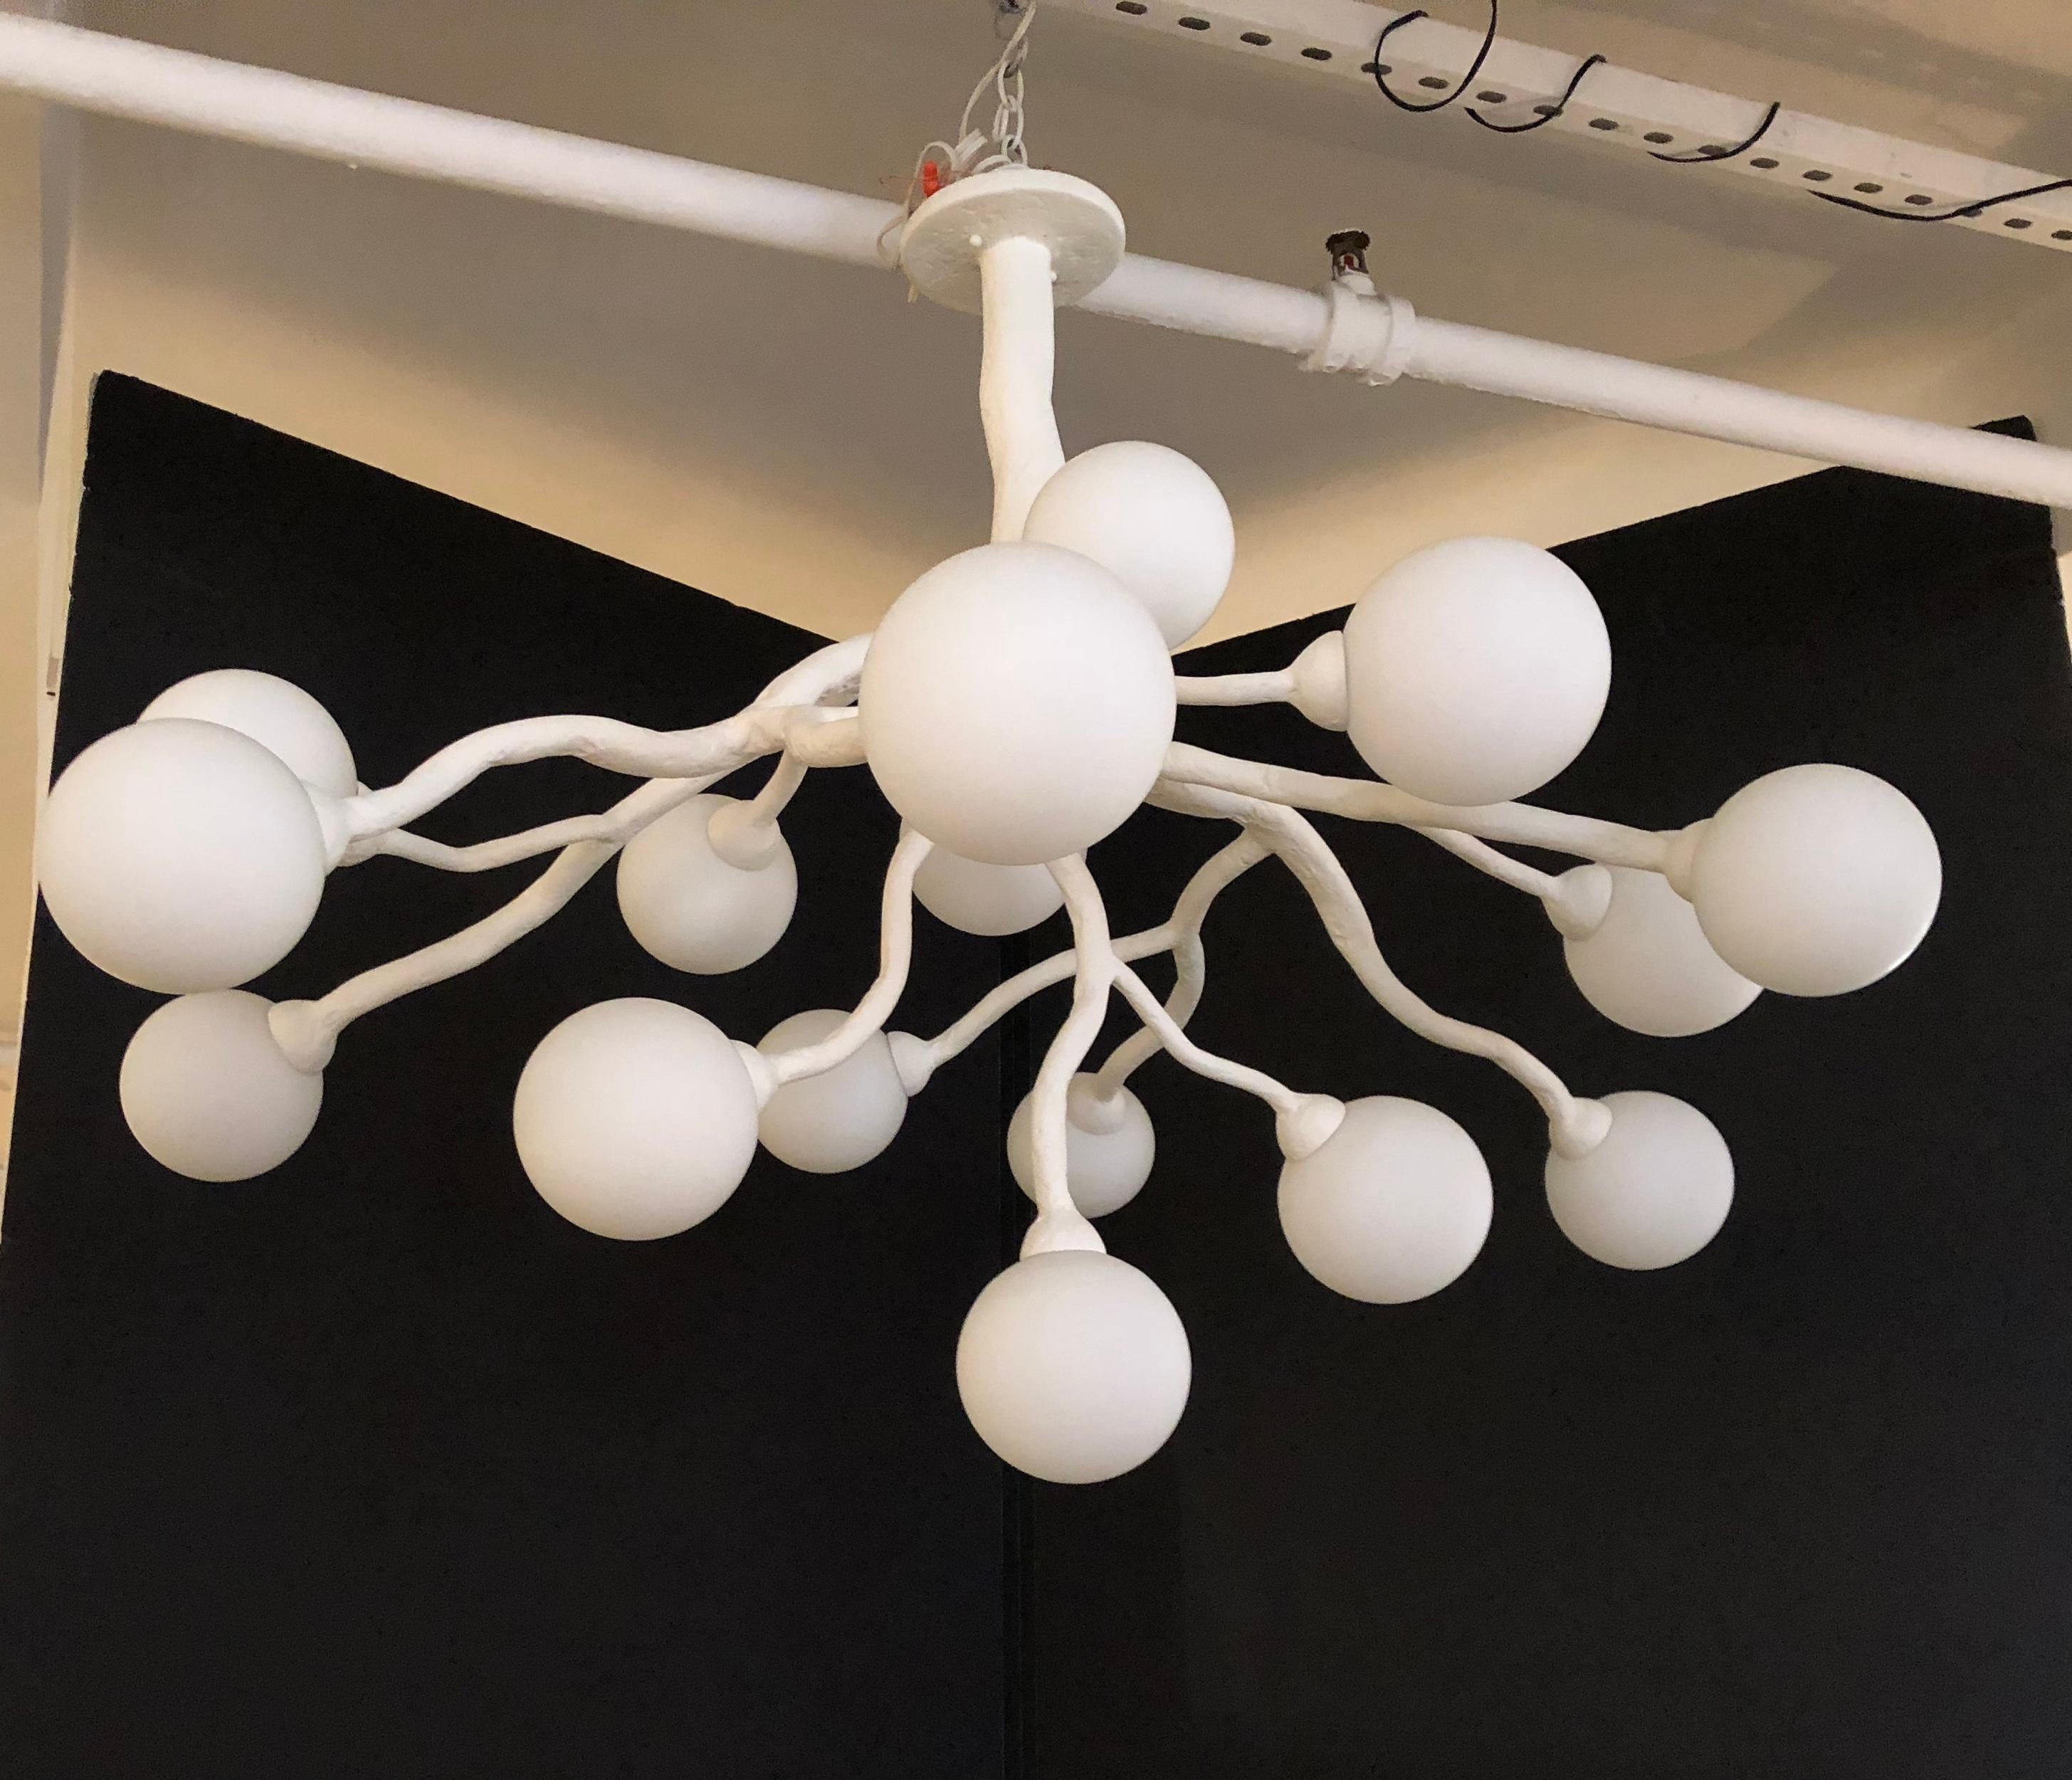 This unique chandelier has a plaster of Paris finish on it organic design frame. The light has 16 opaline glass diffusers. Light uses 16 candelabra base bulbs. Max wattage 40 each socket. This piece is created to order and we can customize the